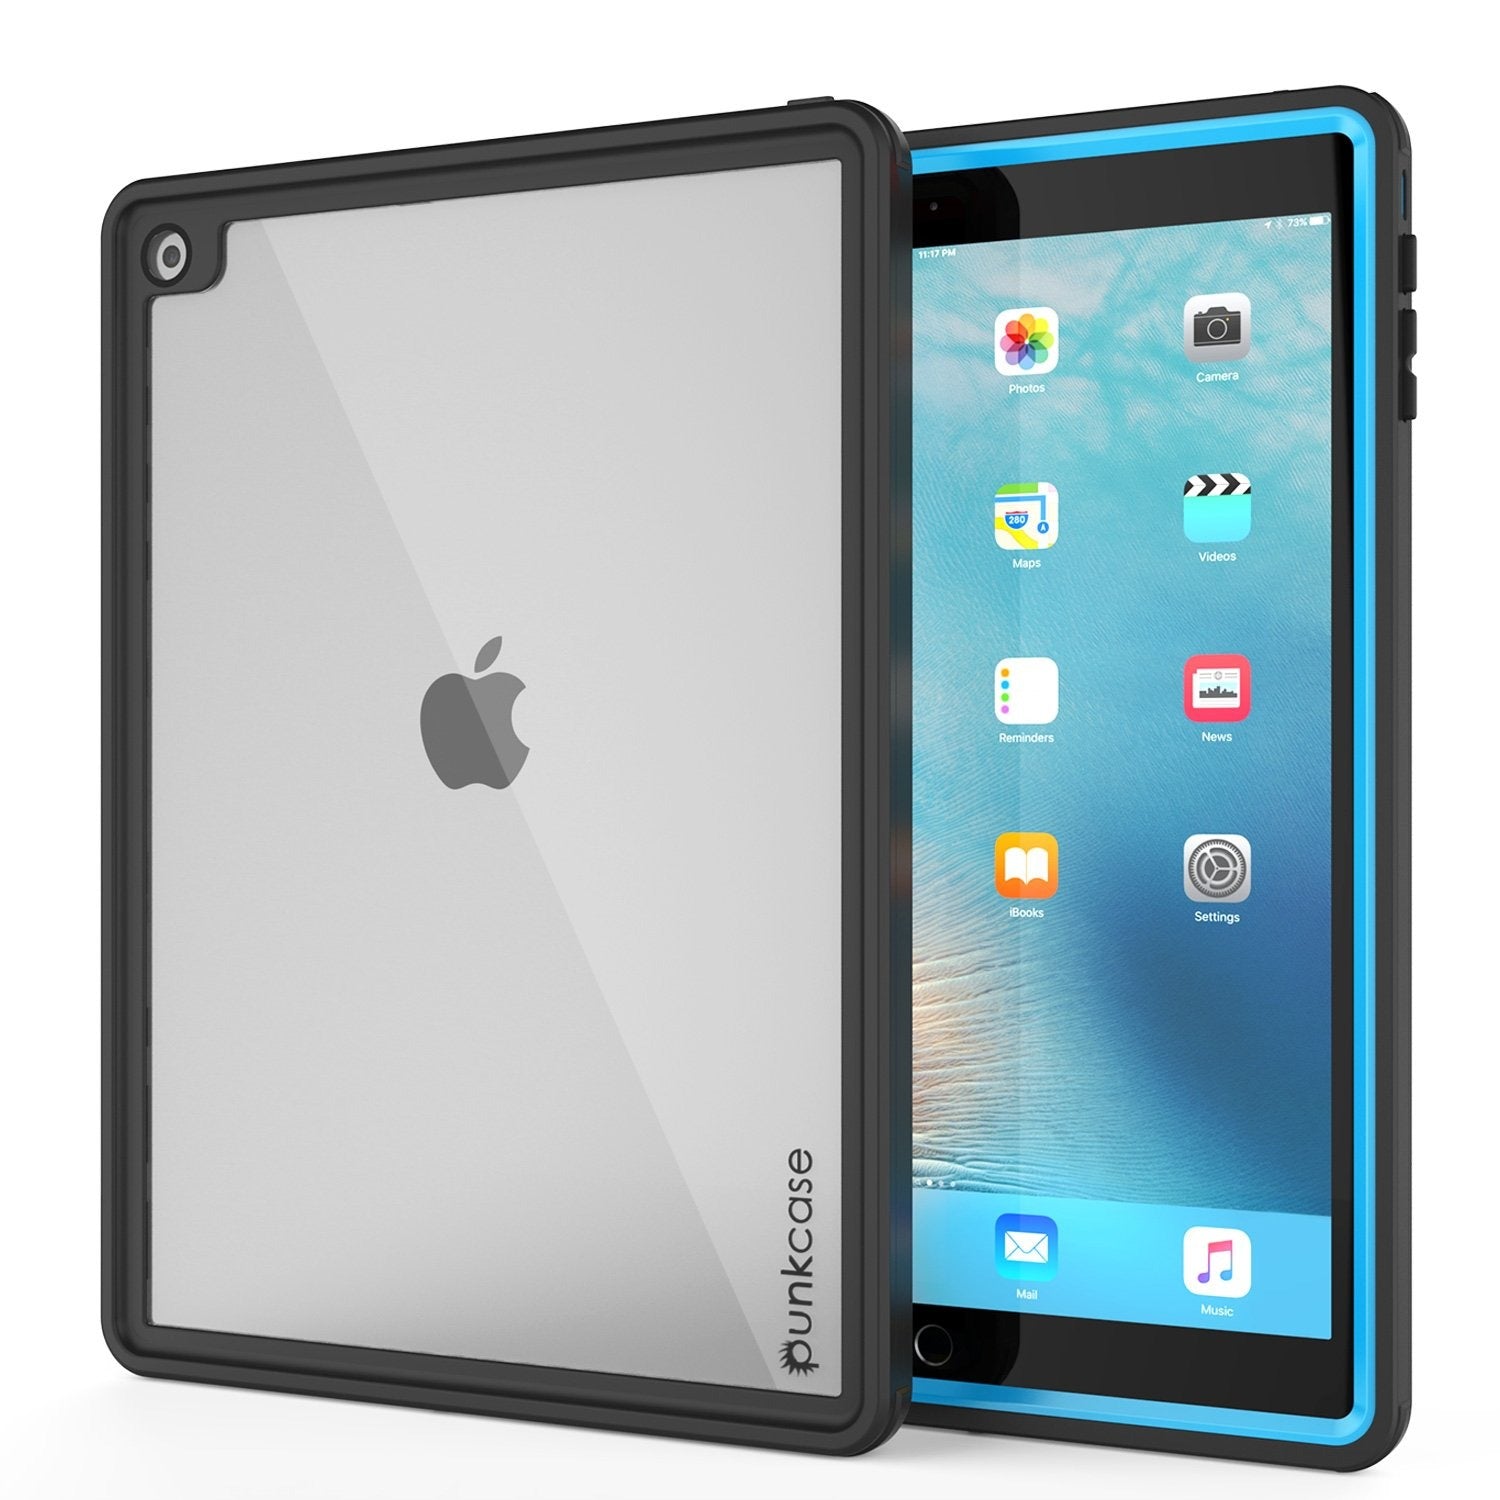 Punkcase iPad Pro 9.7 Case [CRYSTAL Series], Waterproof, Ultra-Thin Cover [Shockproof] [Dustproof] with Built-in Screen Protector [Light Blue]